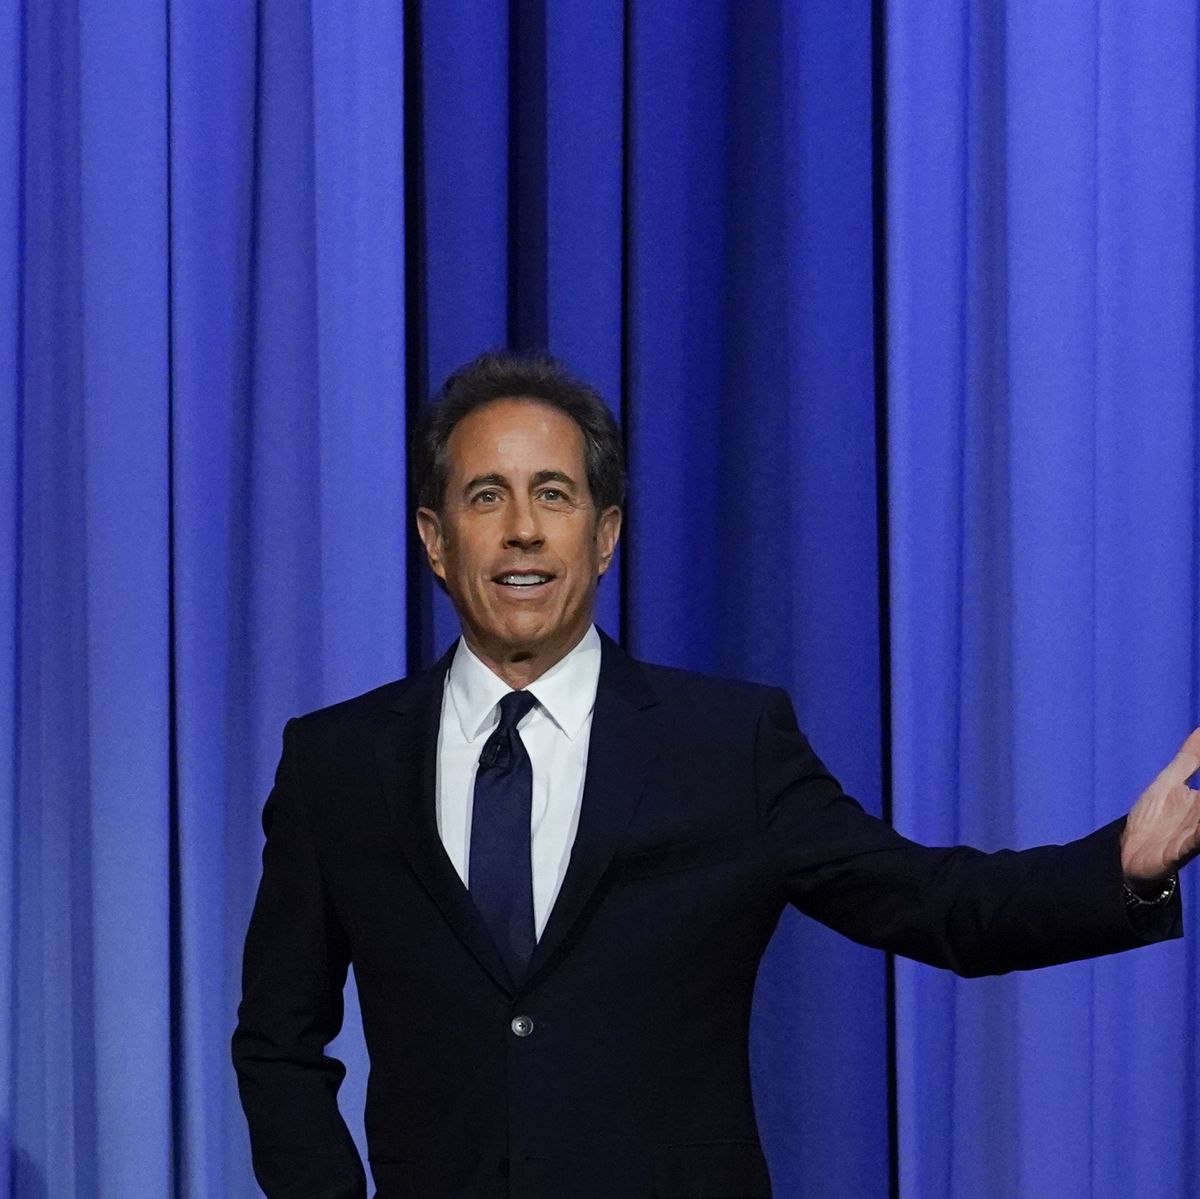 Jerry Seinfeld: Biography, Comedian, Actor